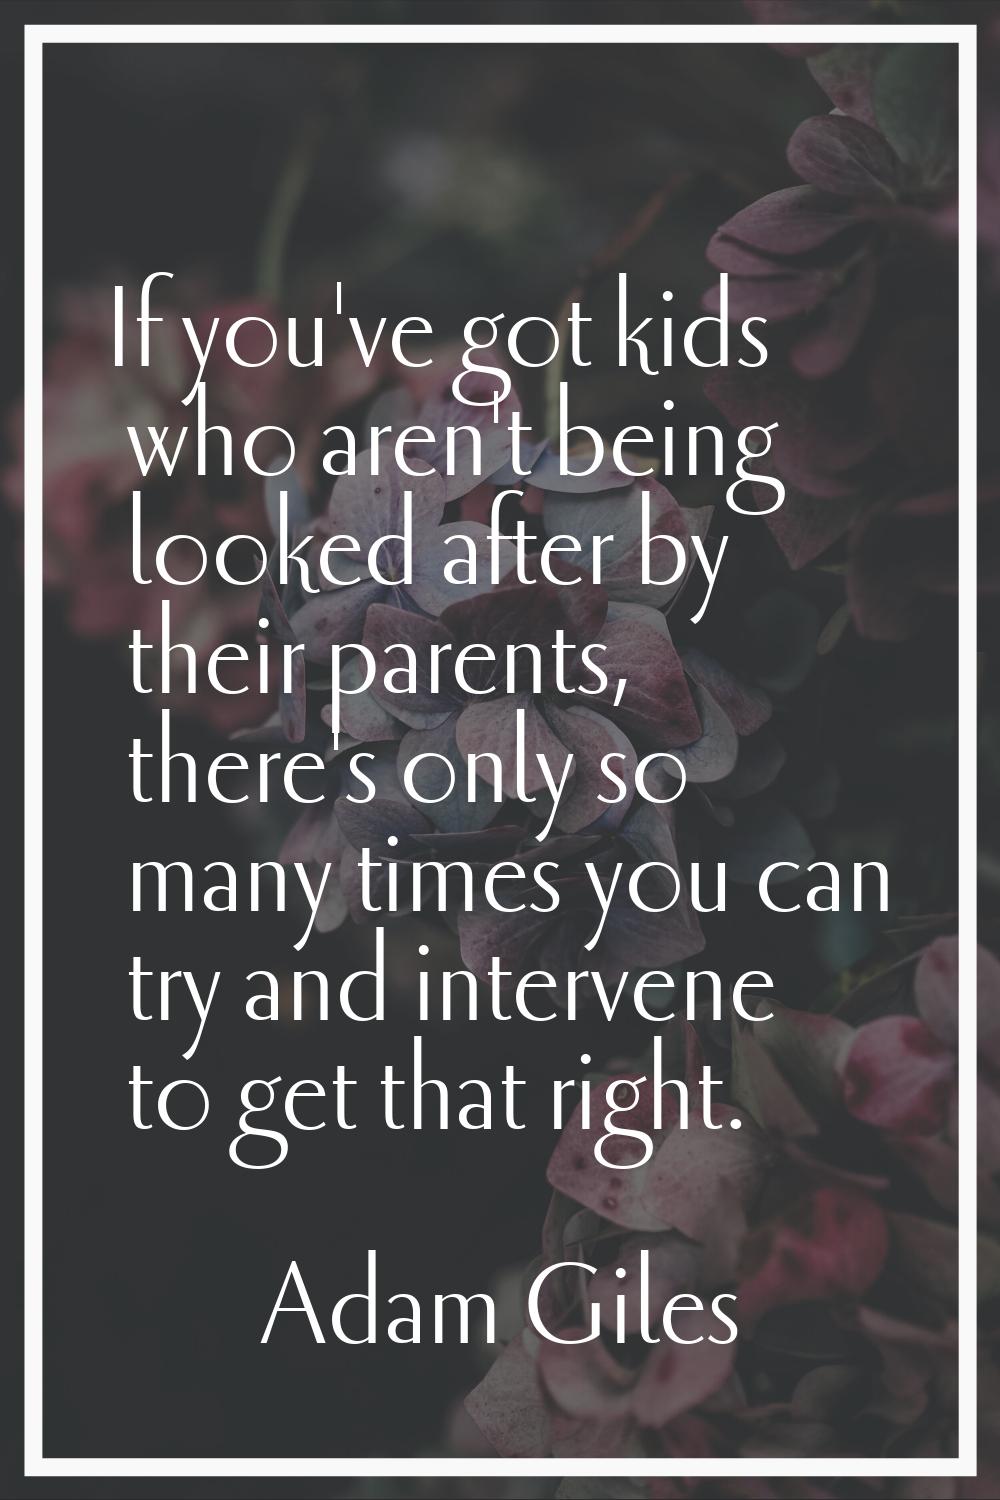 If you've got kids who aren't being looked after by their parents, there's only so many times you c